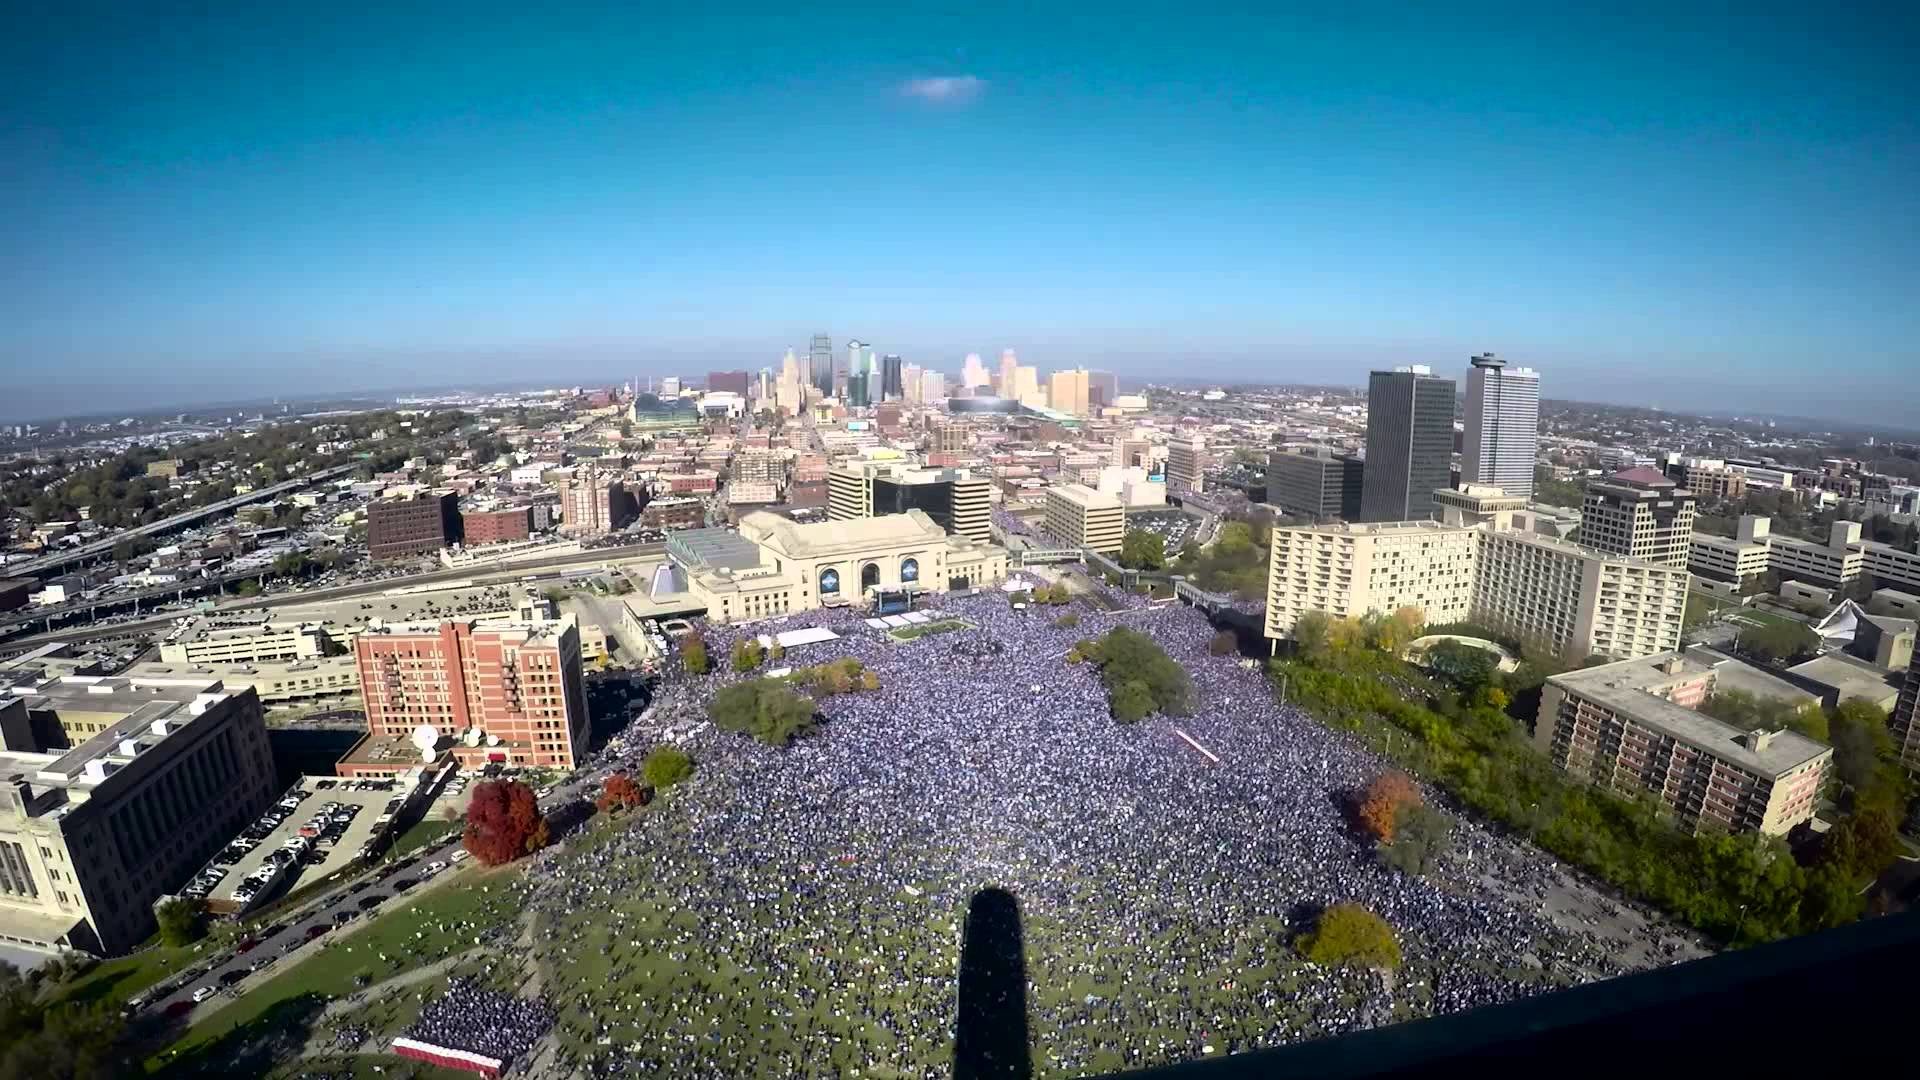 1920x1080 Kansas City Royals World Series Party from the Liberty Memorial - YouTube